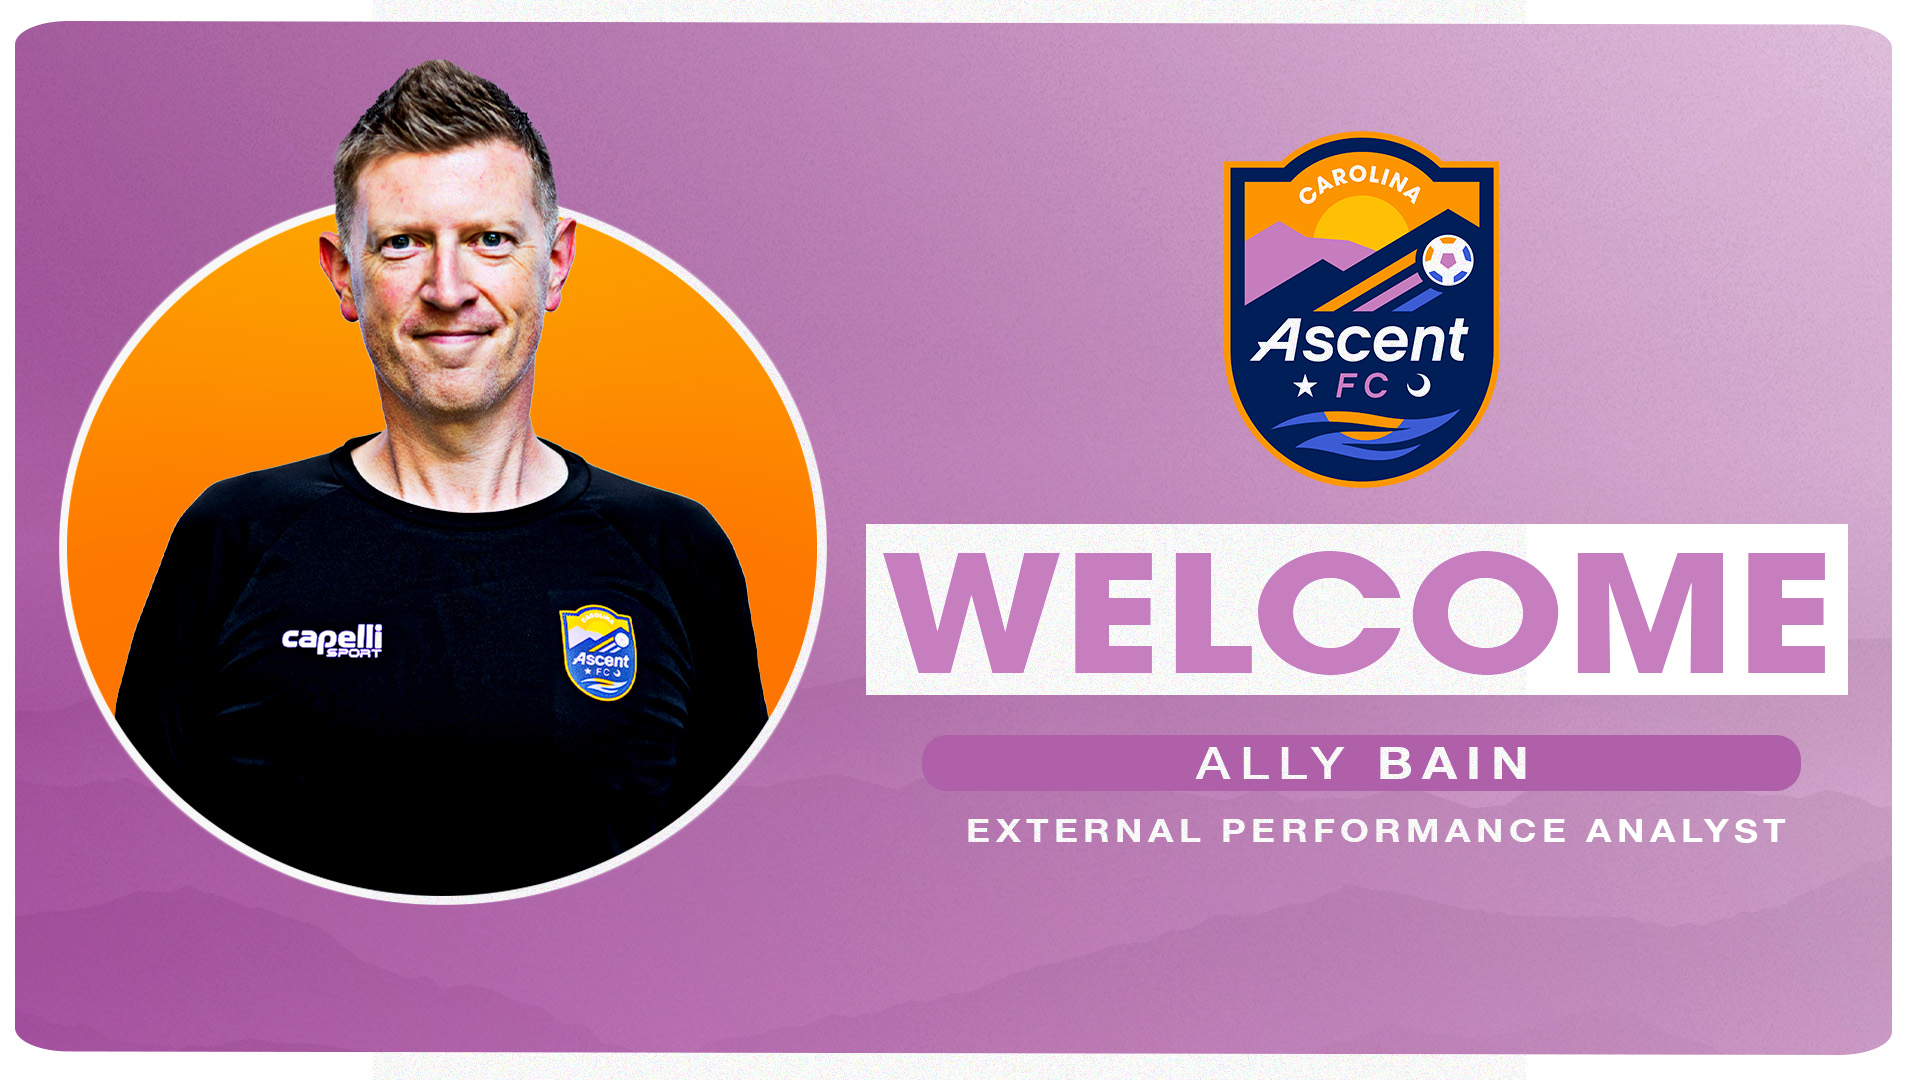 External Performance Analyst, Ally Bain, Joins Carolina Ascent FC Technical Staff featured image